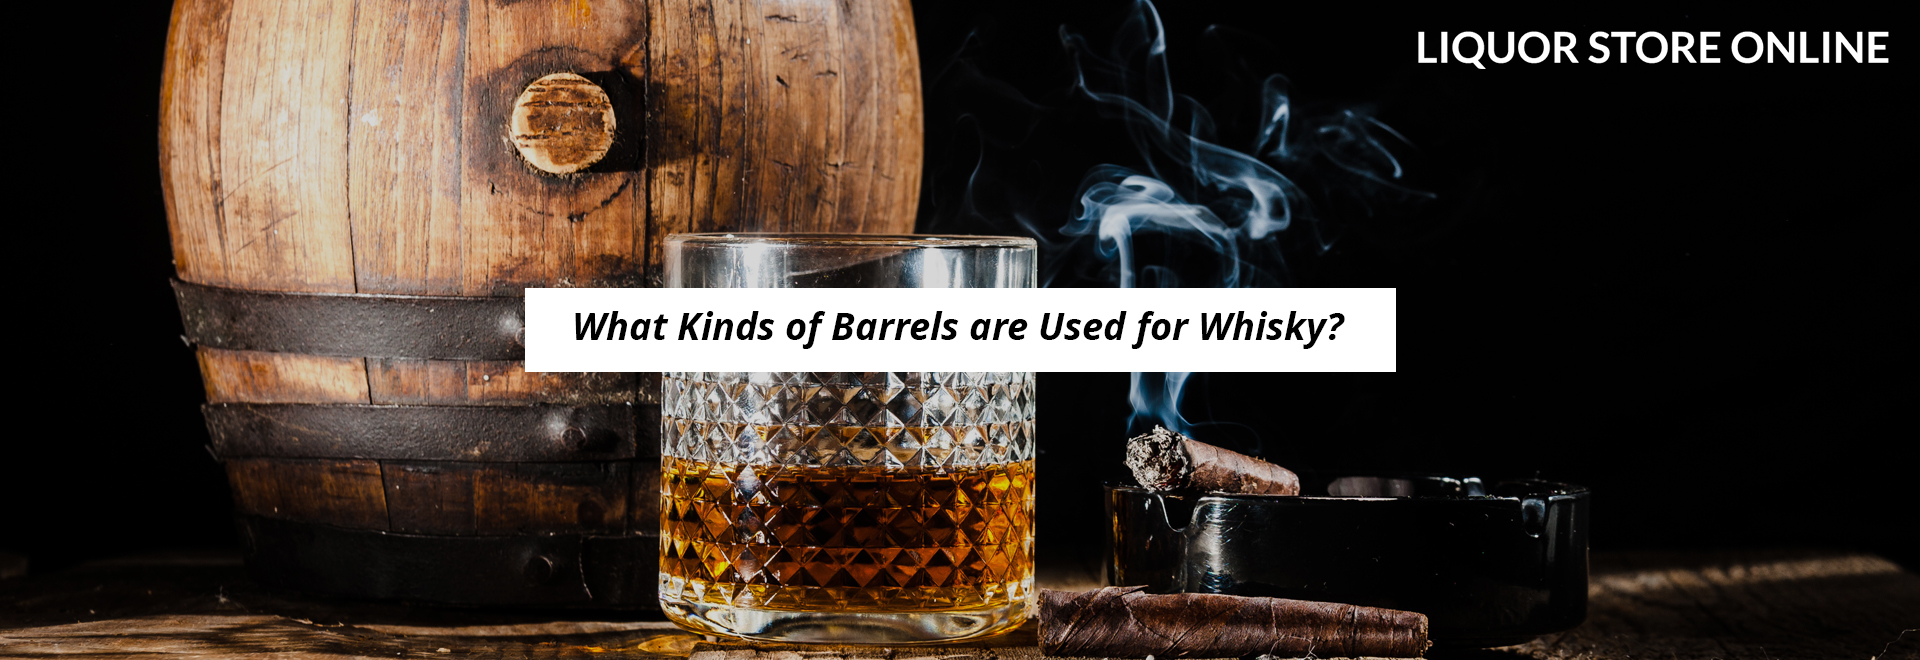 What Kinds of Barrels are Used for Whisky?